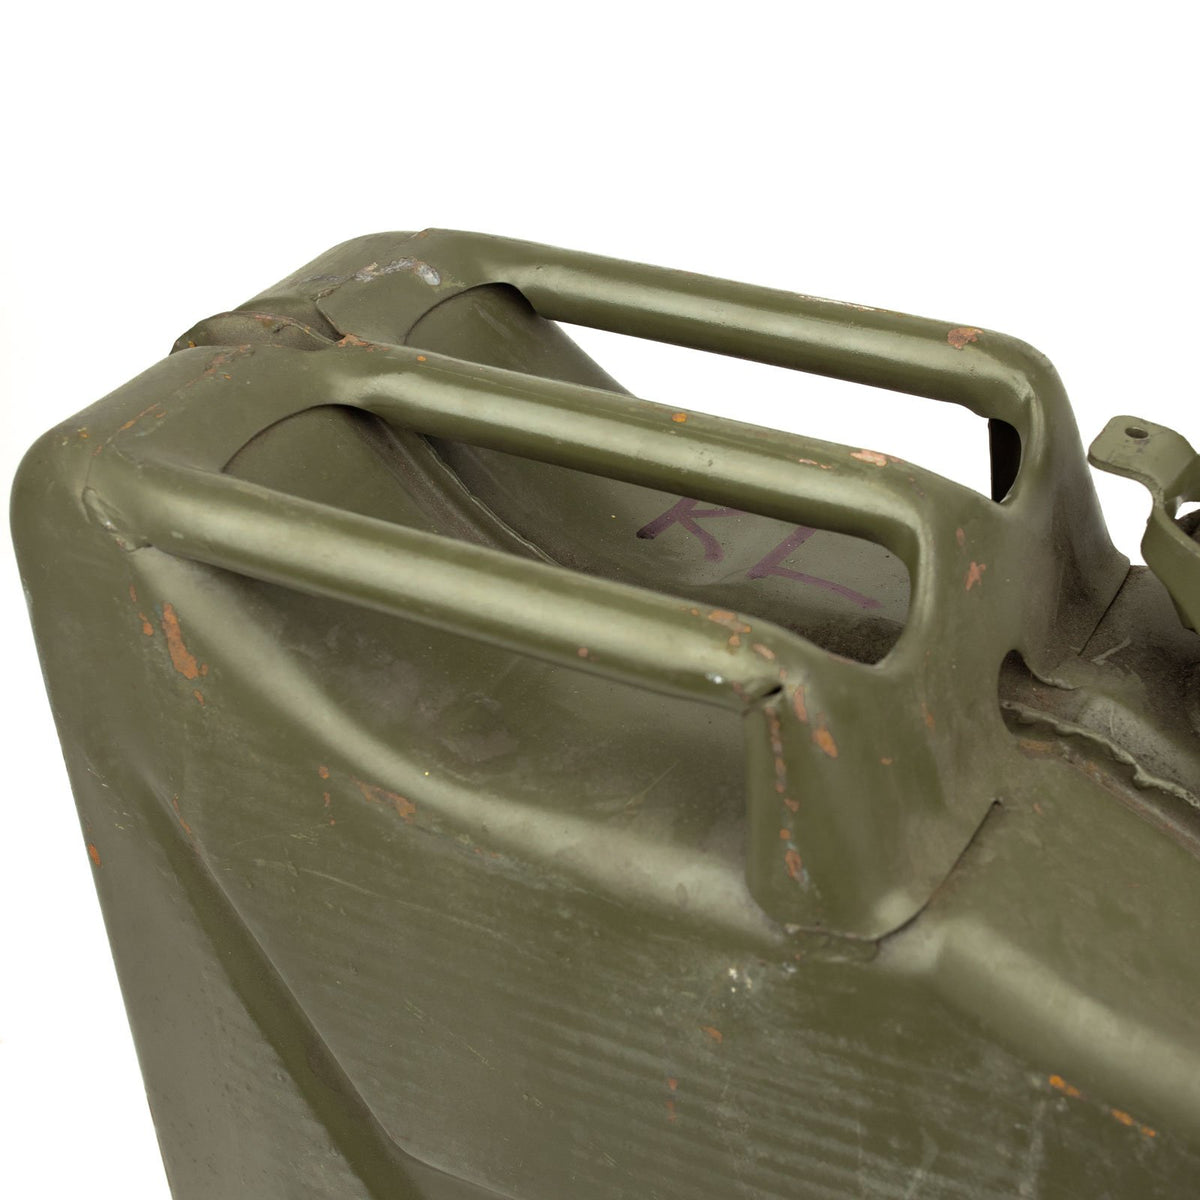 Czech Army Gas Can | Used